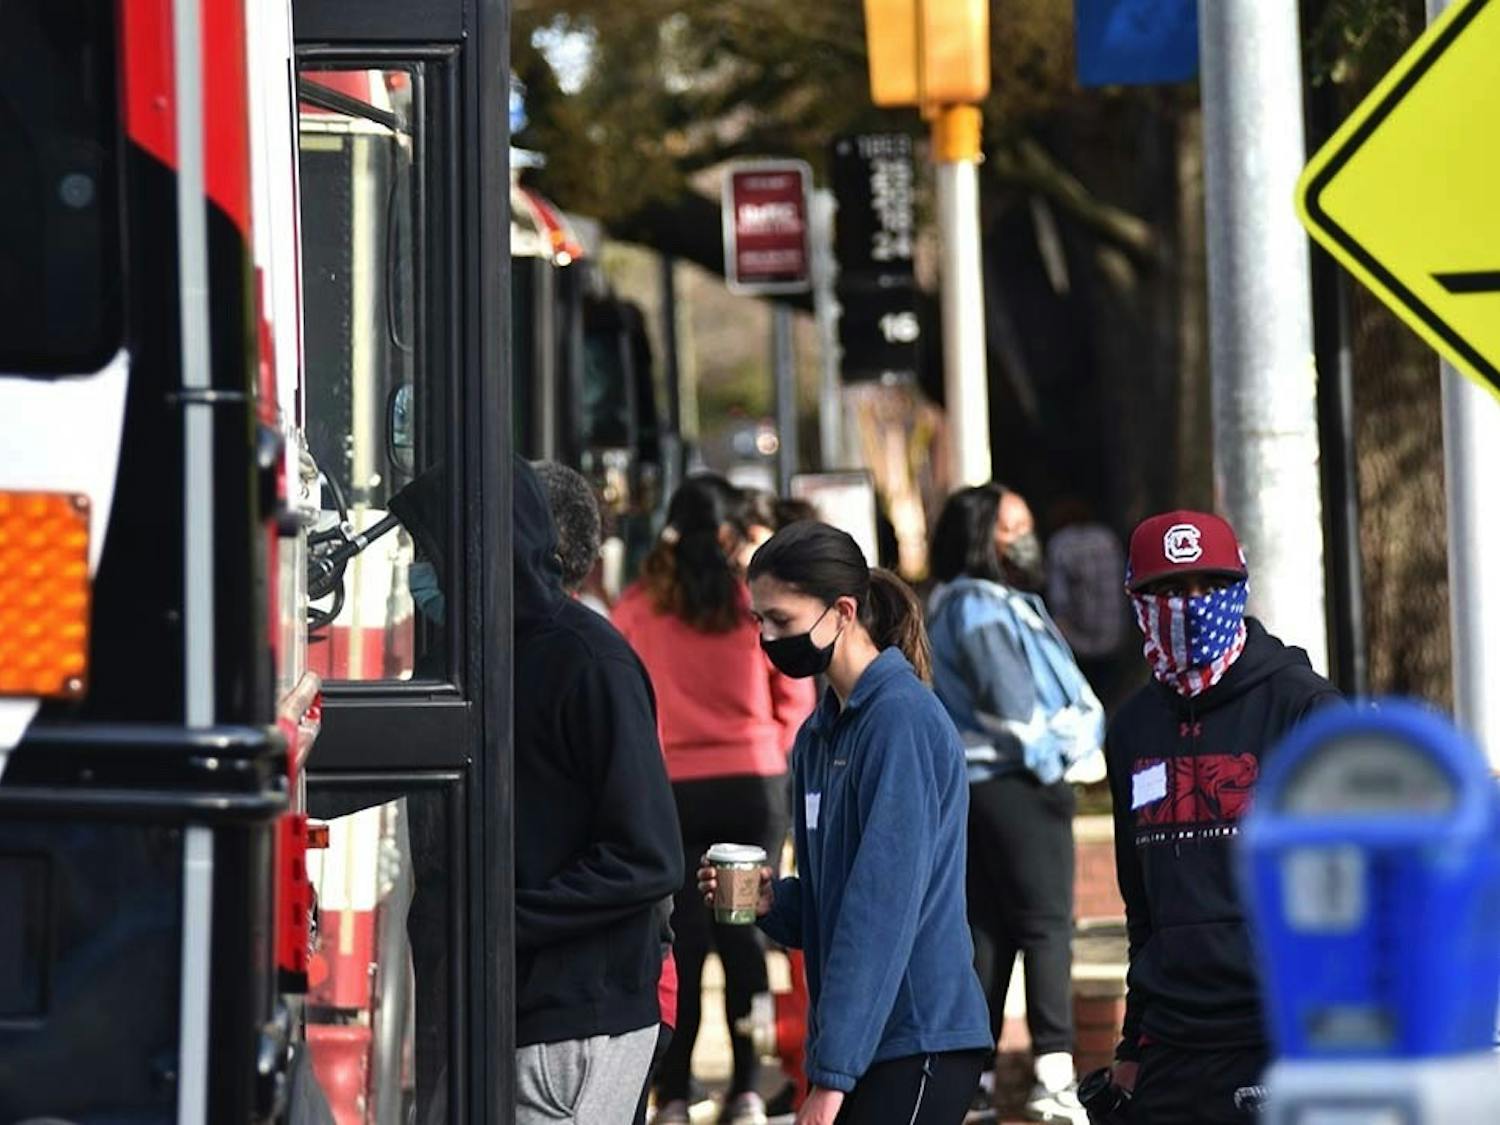 A Central Midlands Regional Transit Authority (COMET) shuttle parked at one of the designated stops around campus as students board the bus. A new rule requires students to swipe their CarolinaCard to board the University of South Carolina affiliated shuttles.